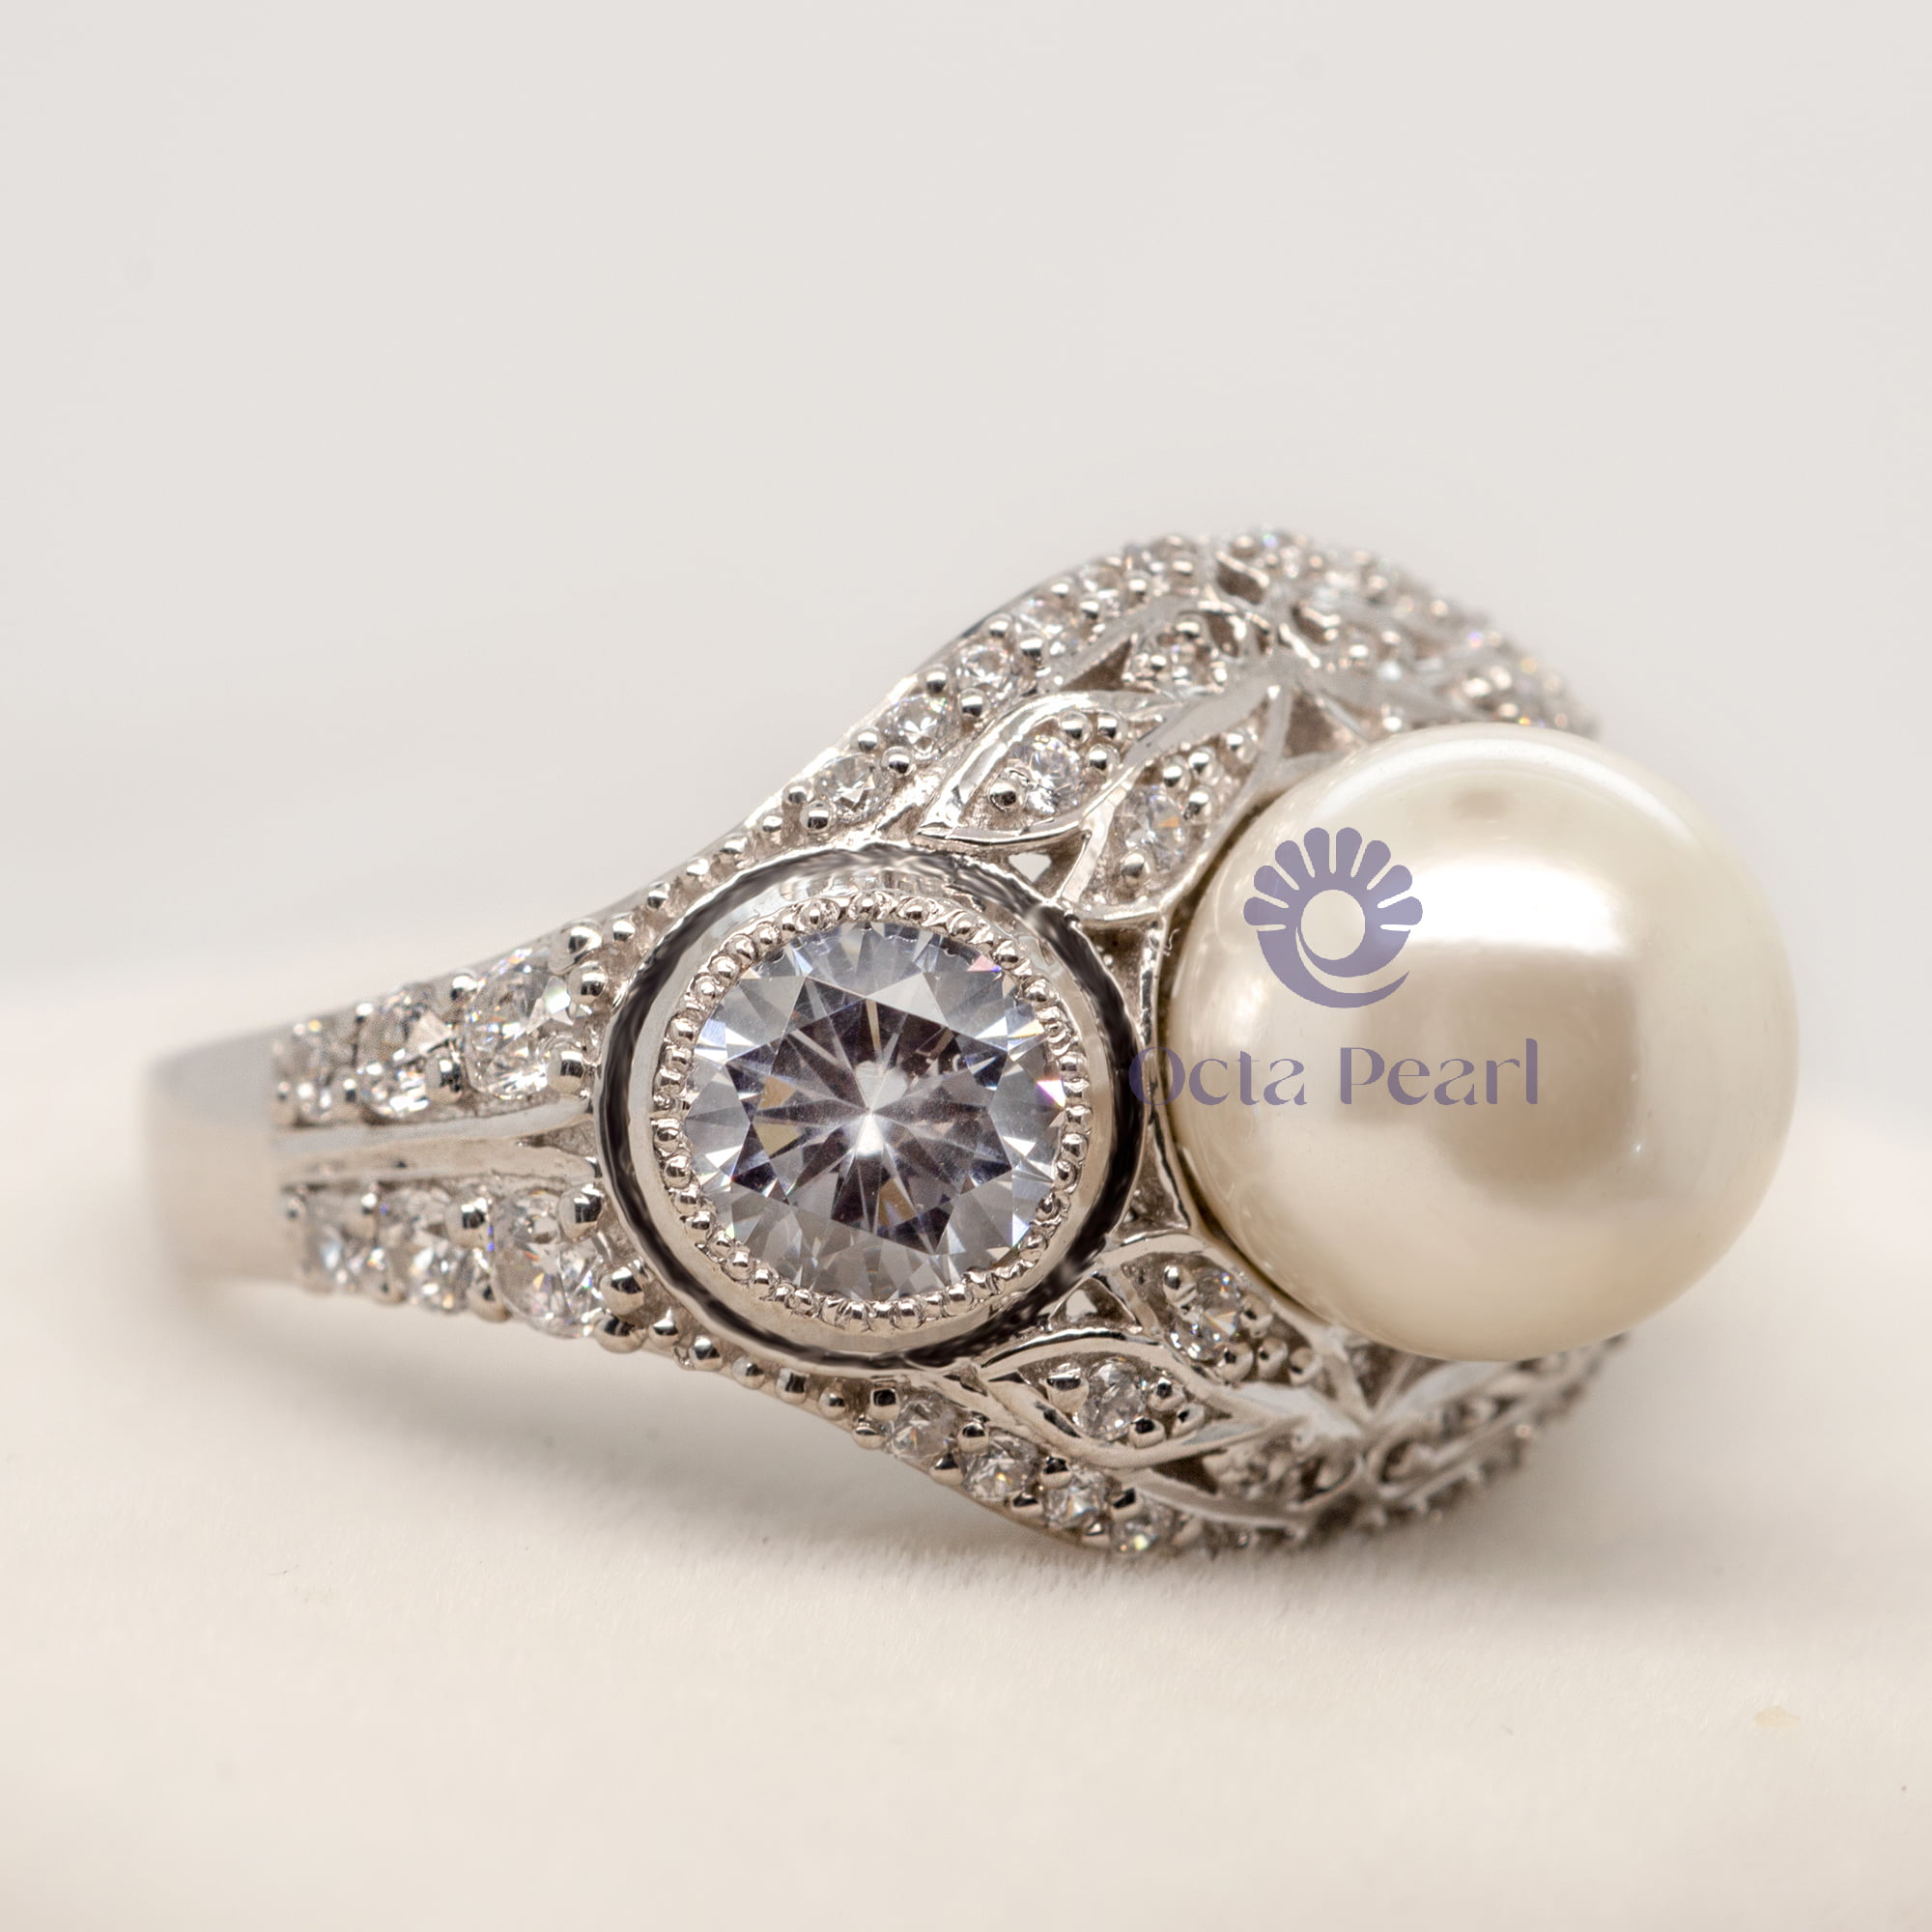 9 MM White Pearl With CZ Round Stone Art Deco Edwardian Wedding Ring For Women